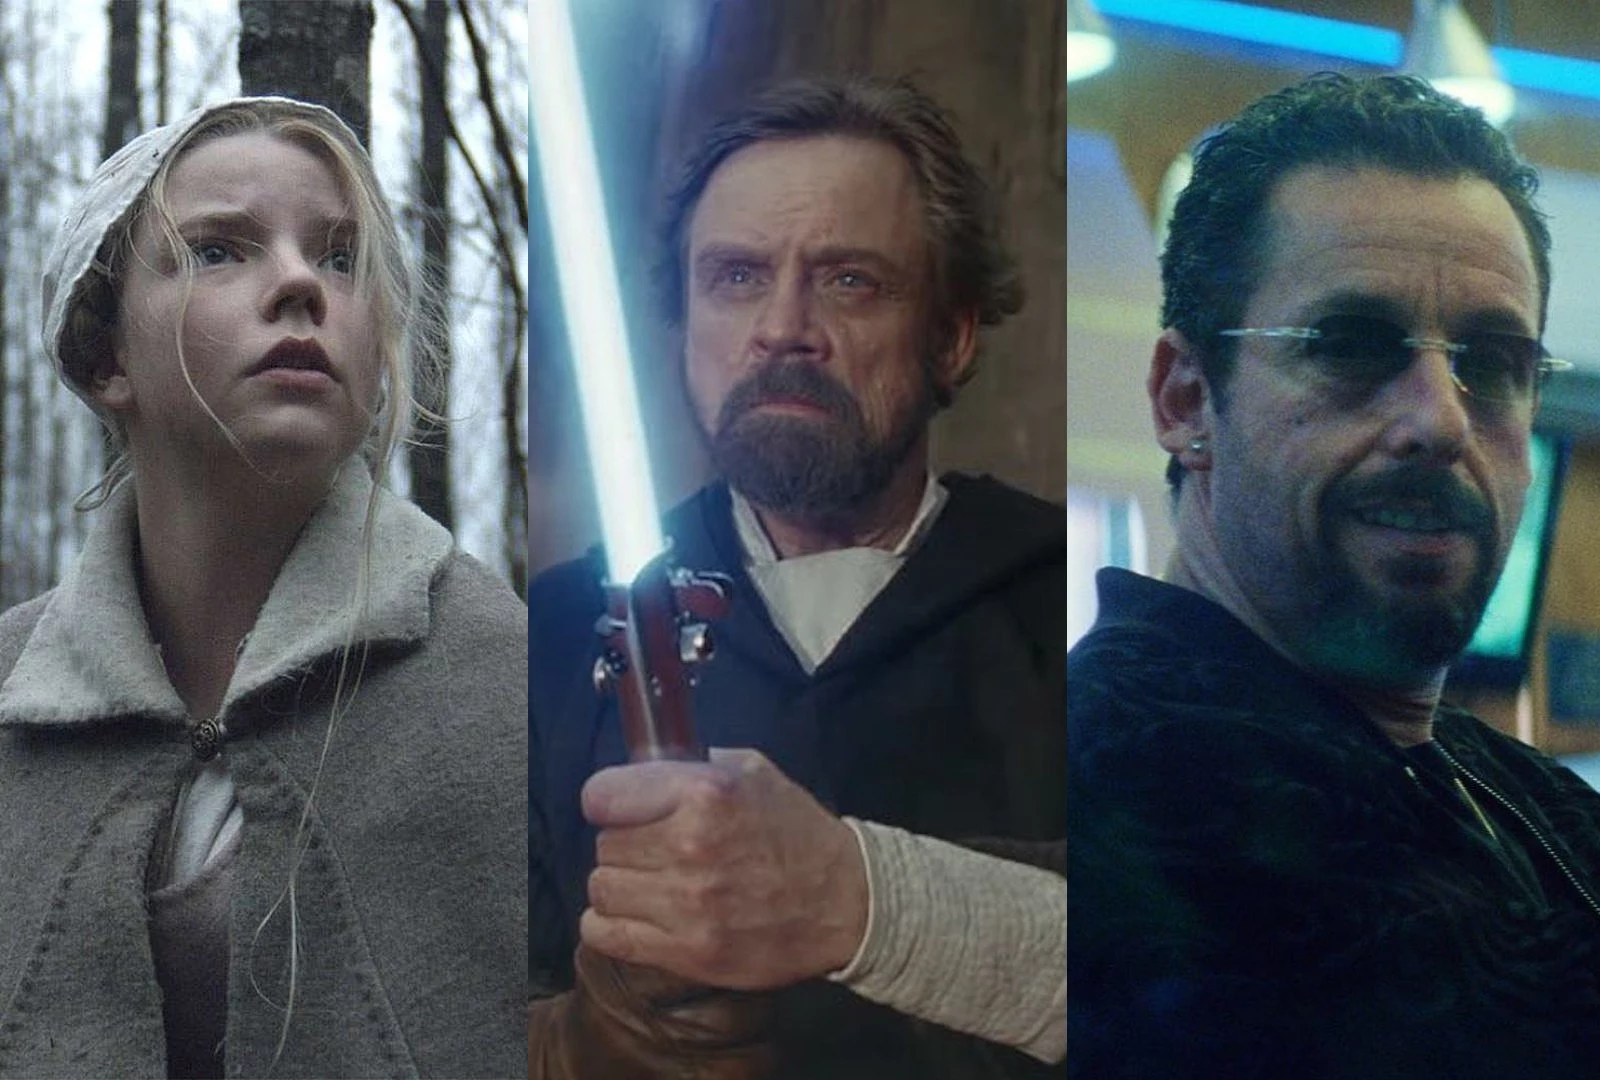 Star Wars: The Last Jedi' Is Officially Certified Fresh On Rotten Tomatoes